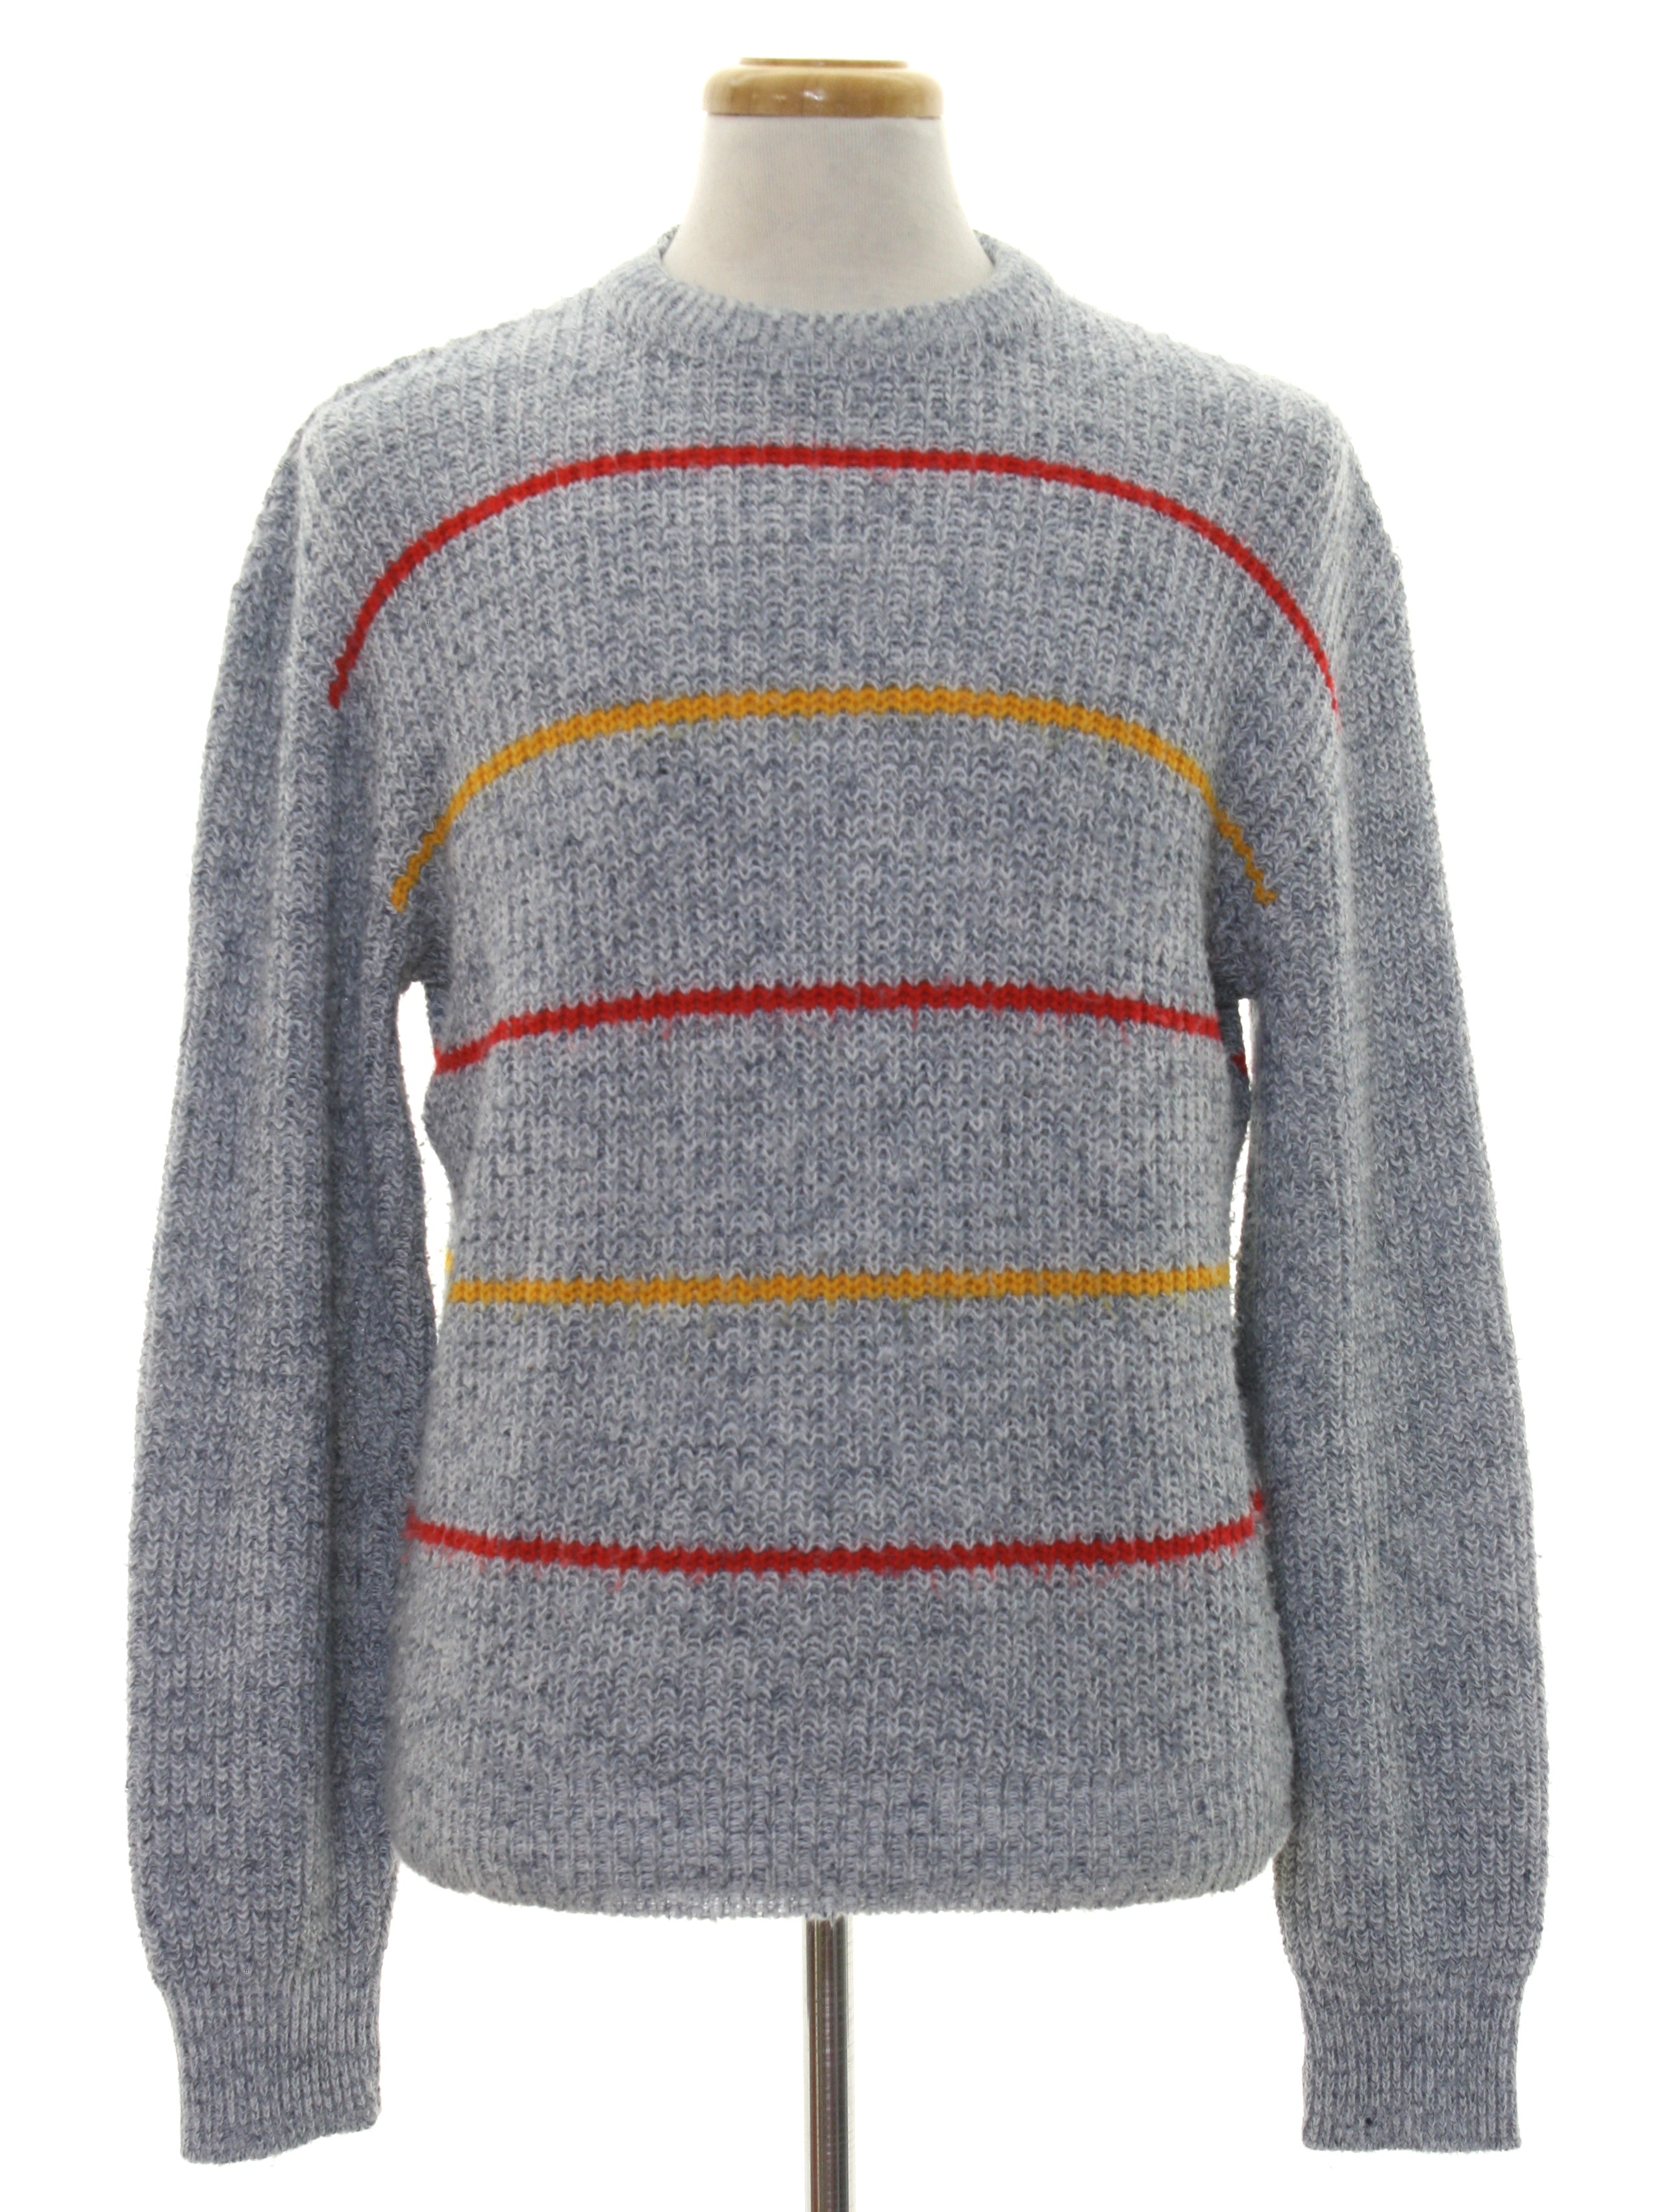 Vintage Bugge 1980s Sweater: 80s -Bugge- Mens heathered blue grey and ...